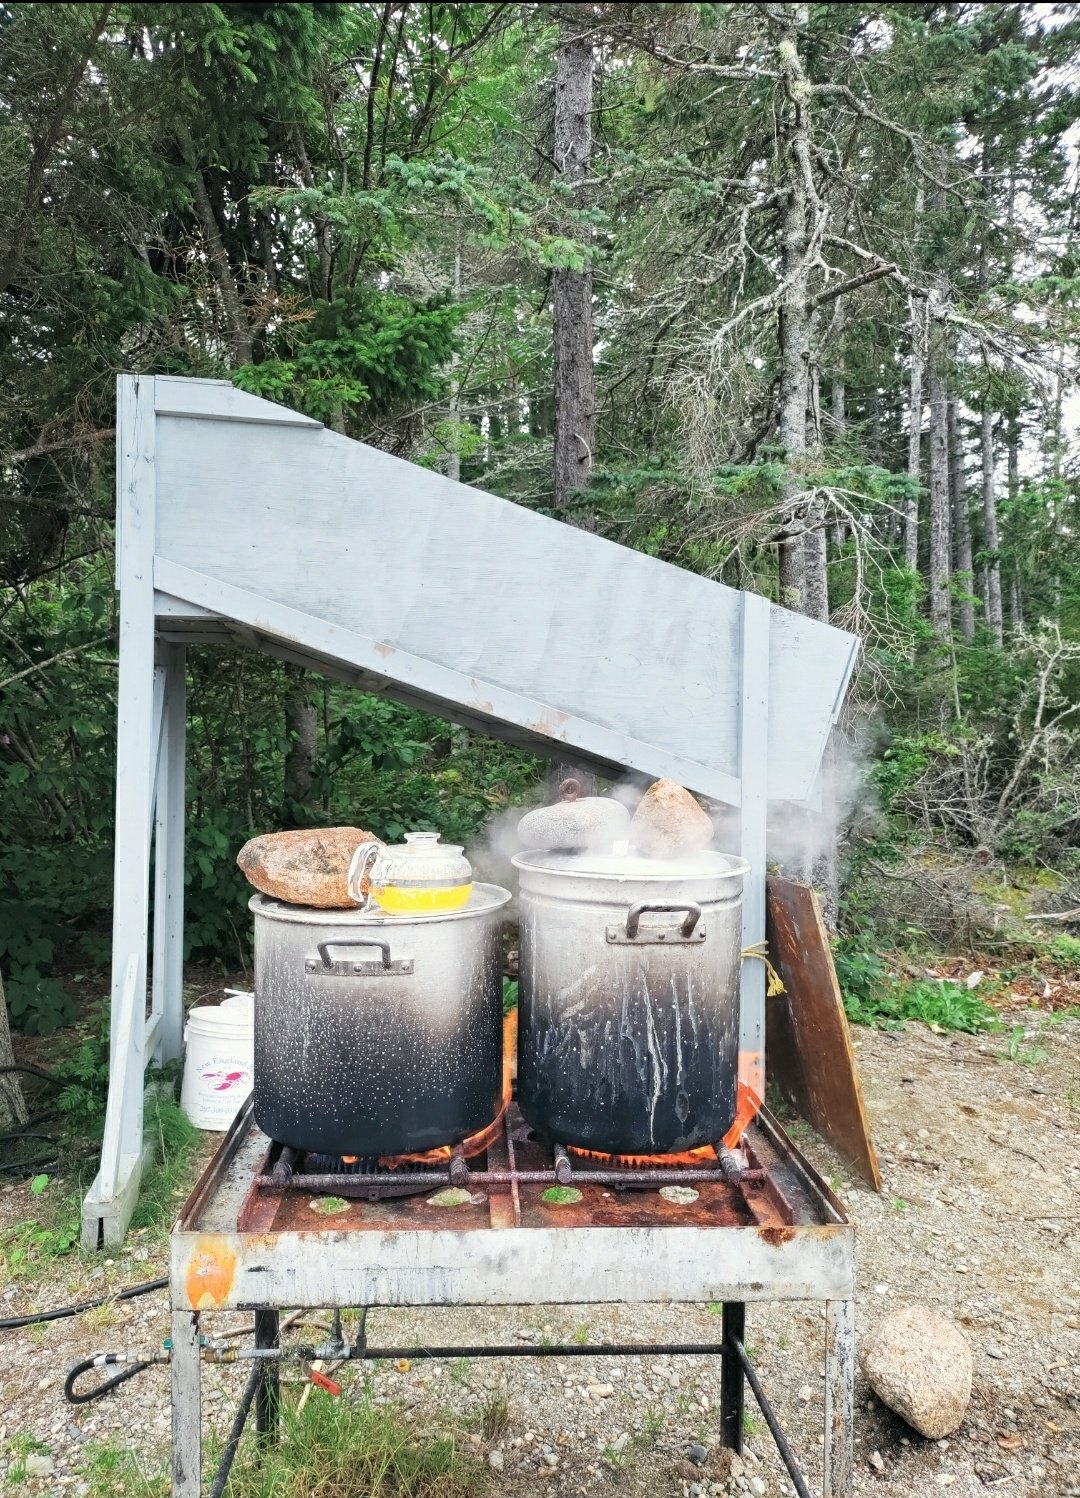 Boiling the lobsters at Burnt Cove Boil, Stonington, Maine